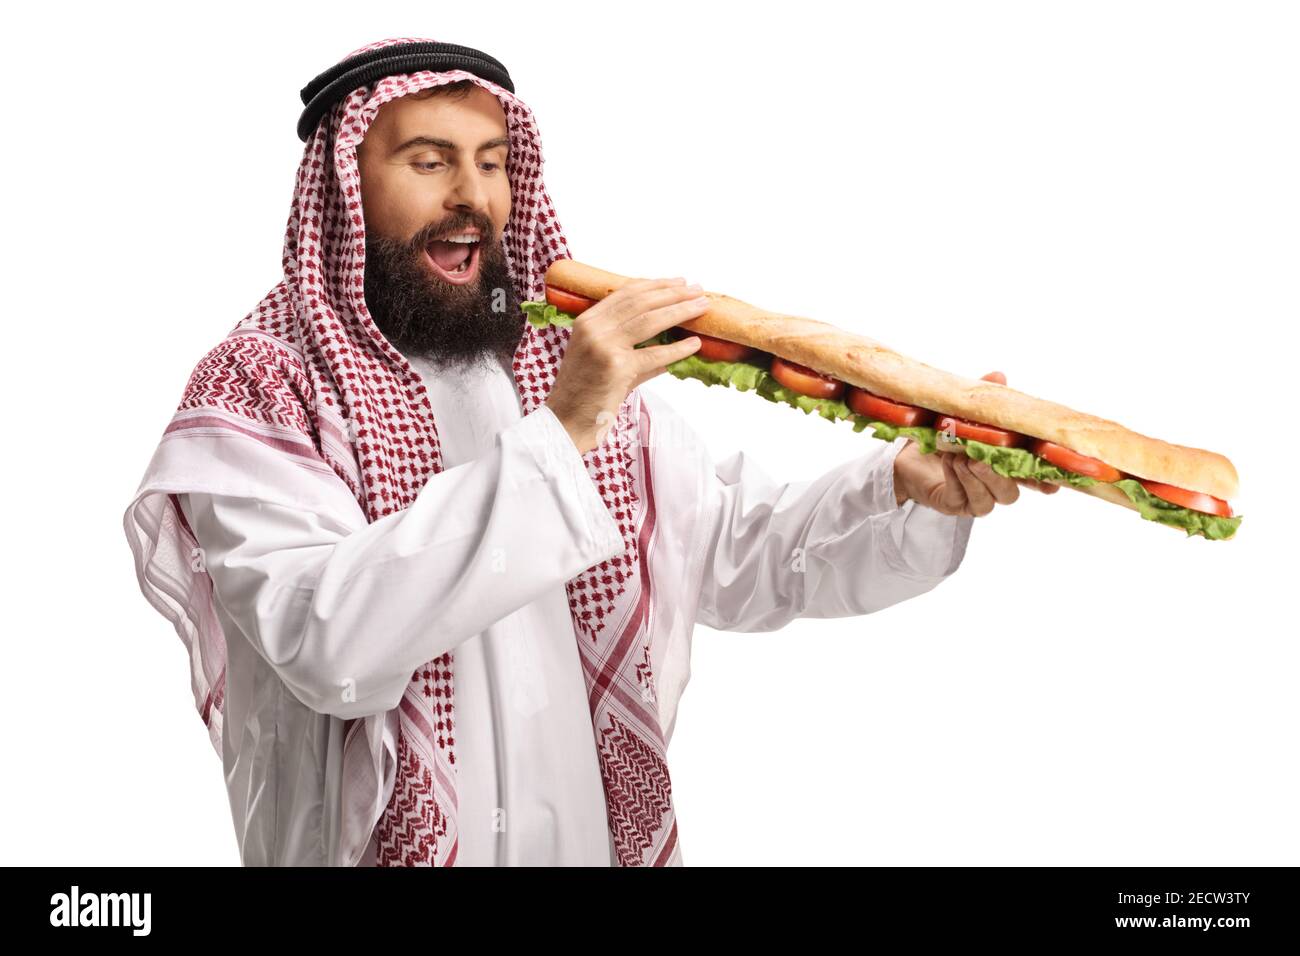 Saudi arab man eating a long baguette sandwich isolated on white background Stock Photo